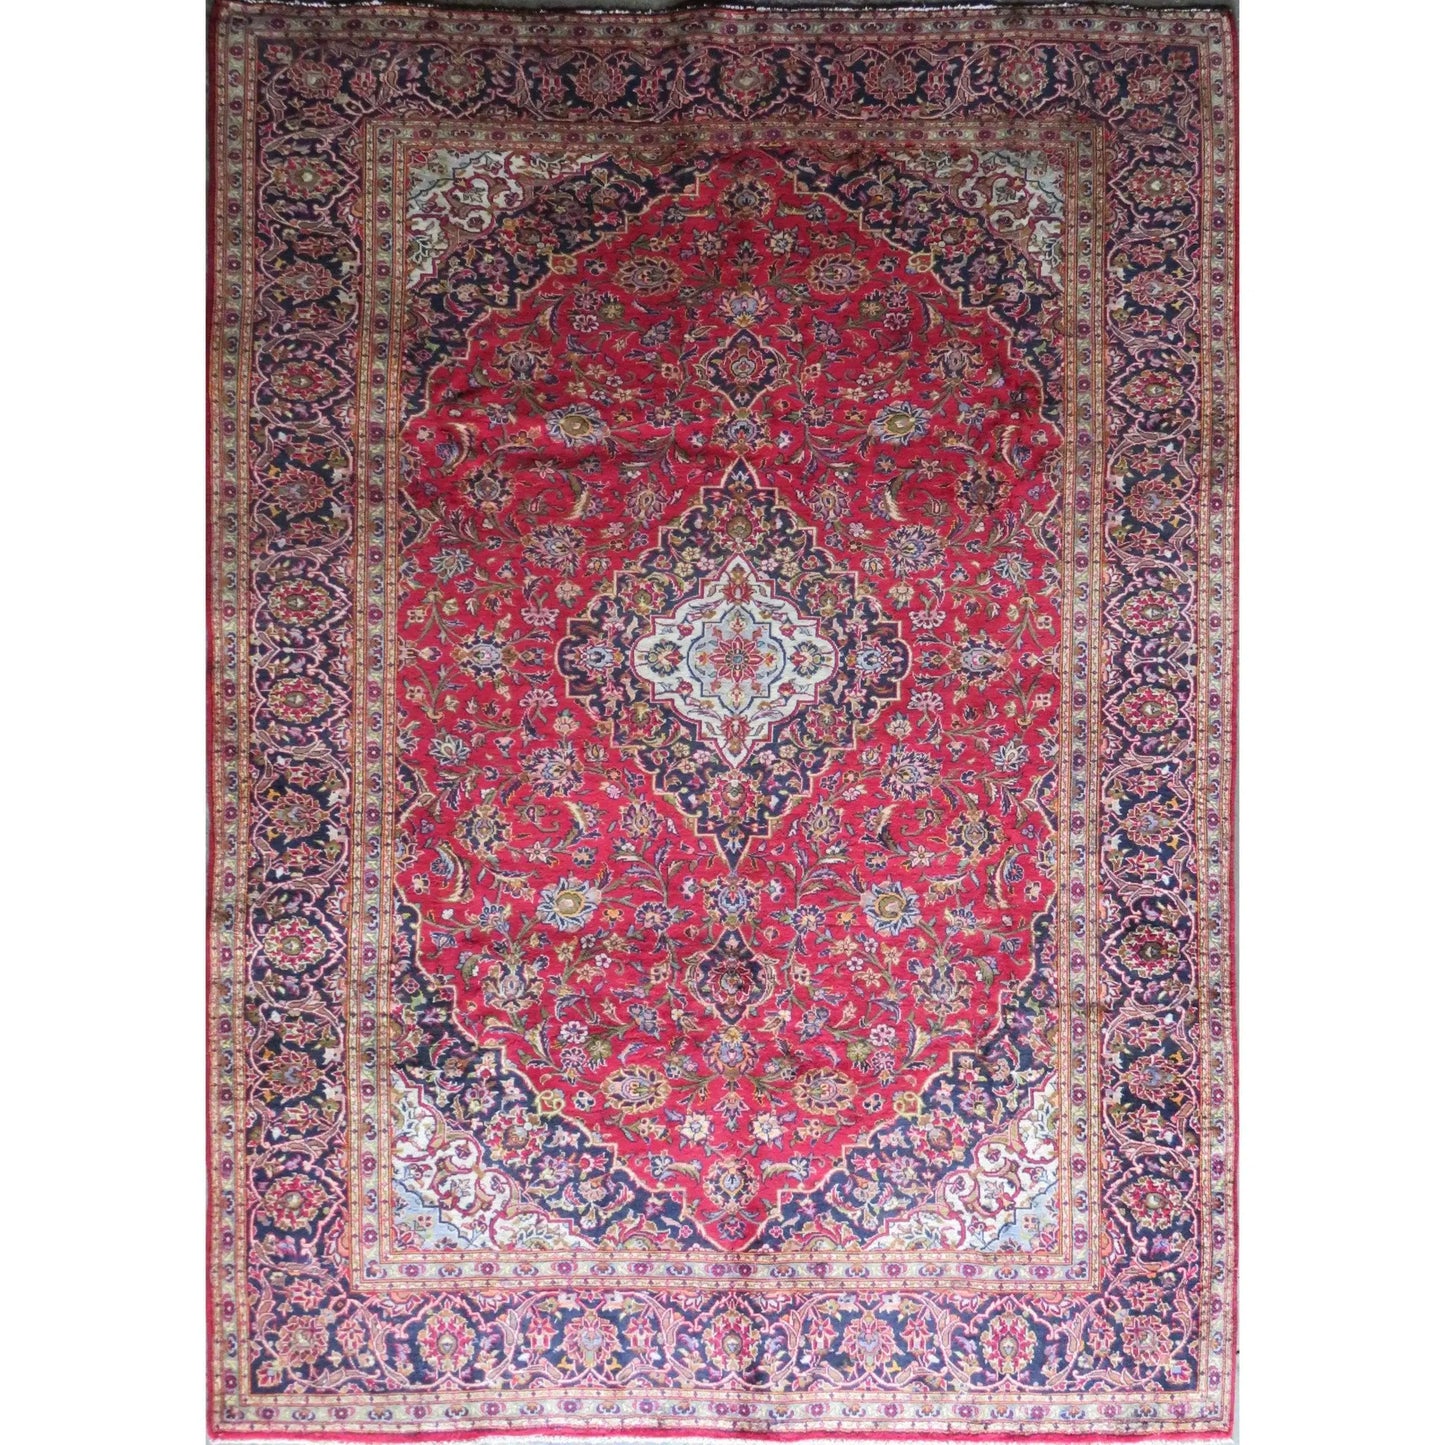 Hand-Knotted Persian Wool Rug _ Luxurious Vintage Design, 12'1" X 8'7", Artisan Crafted